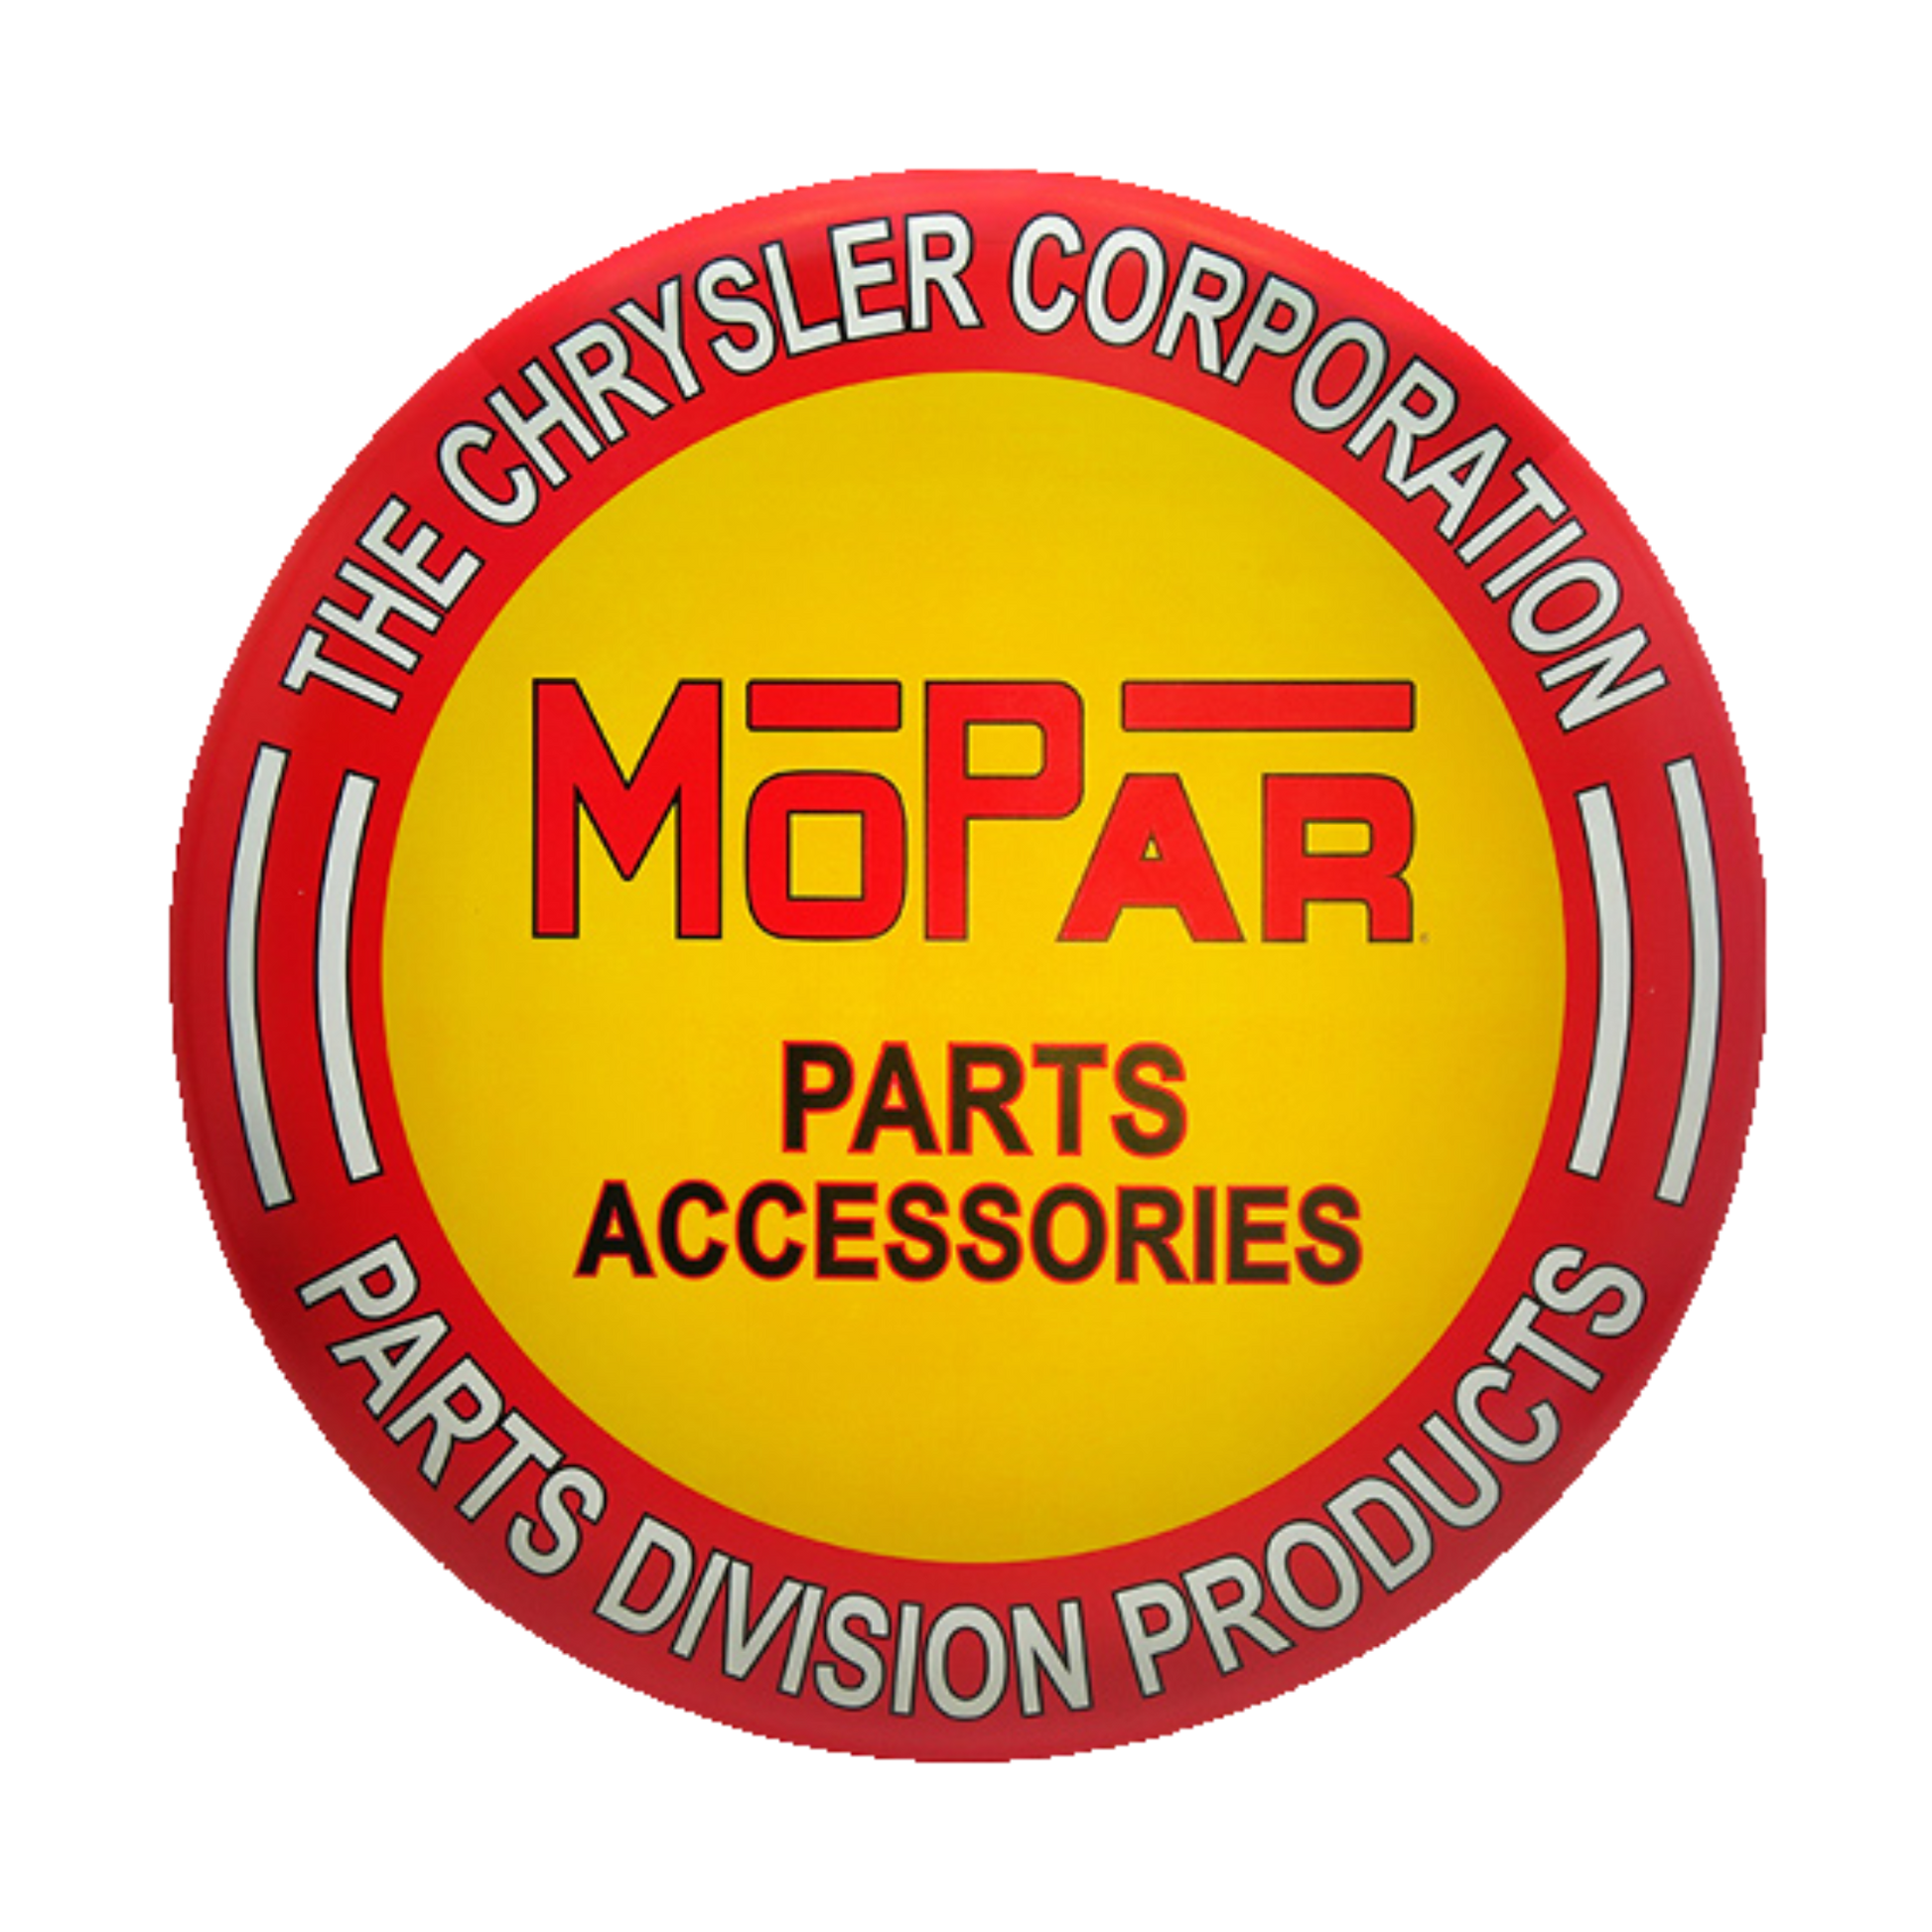 Red and yellow tin sign featuring the Mopar logo, with references to the Chrysler Corporation and Parts Division Products.